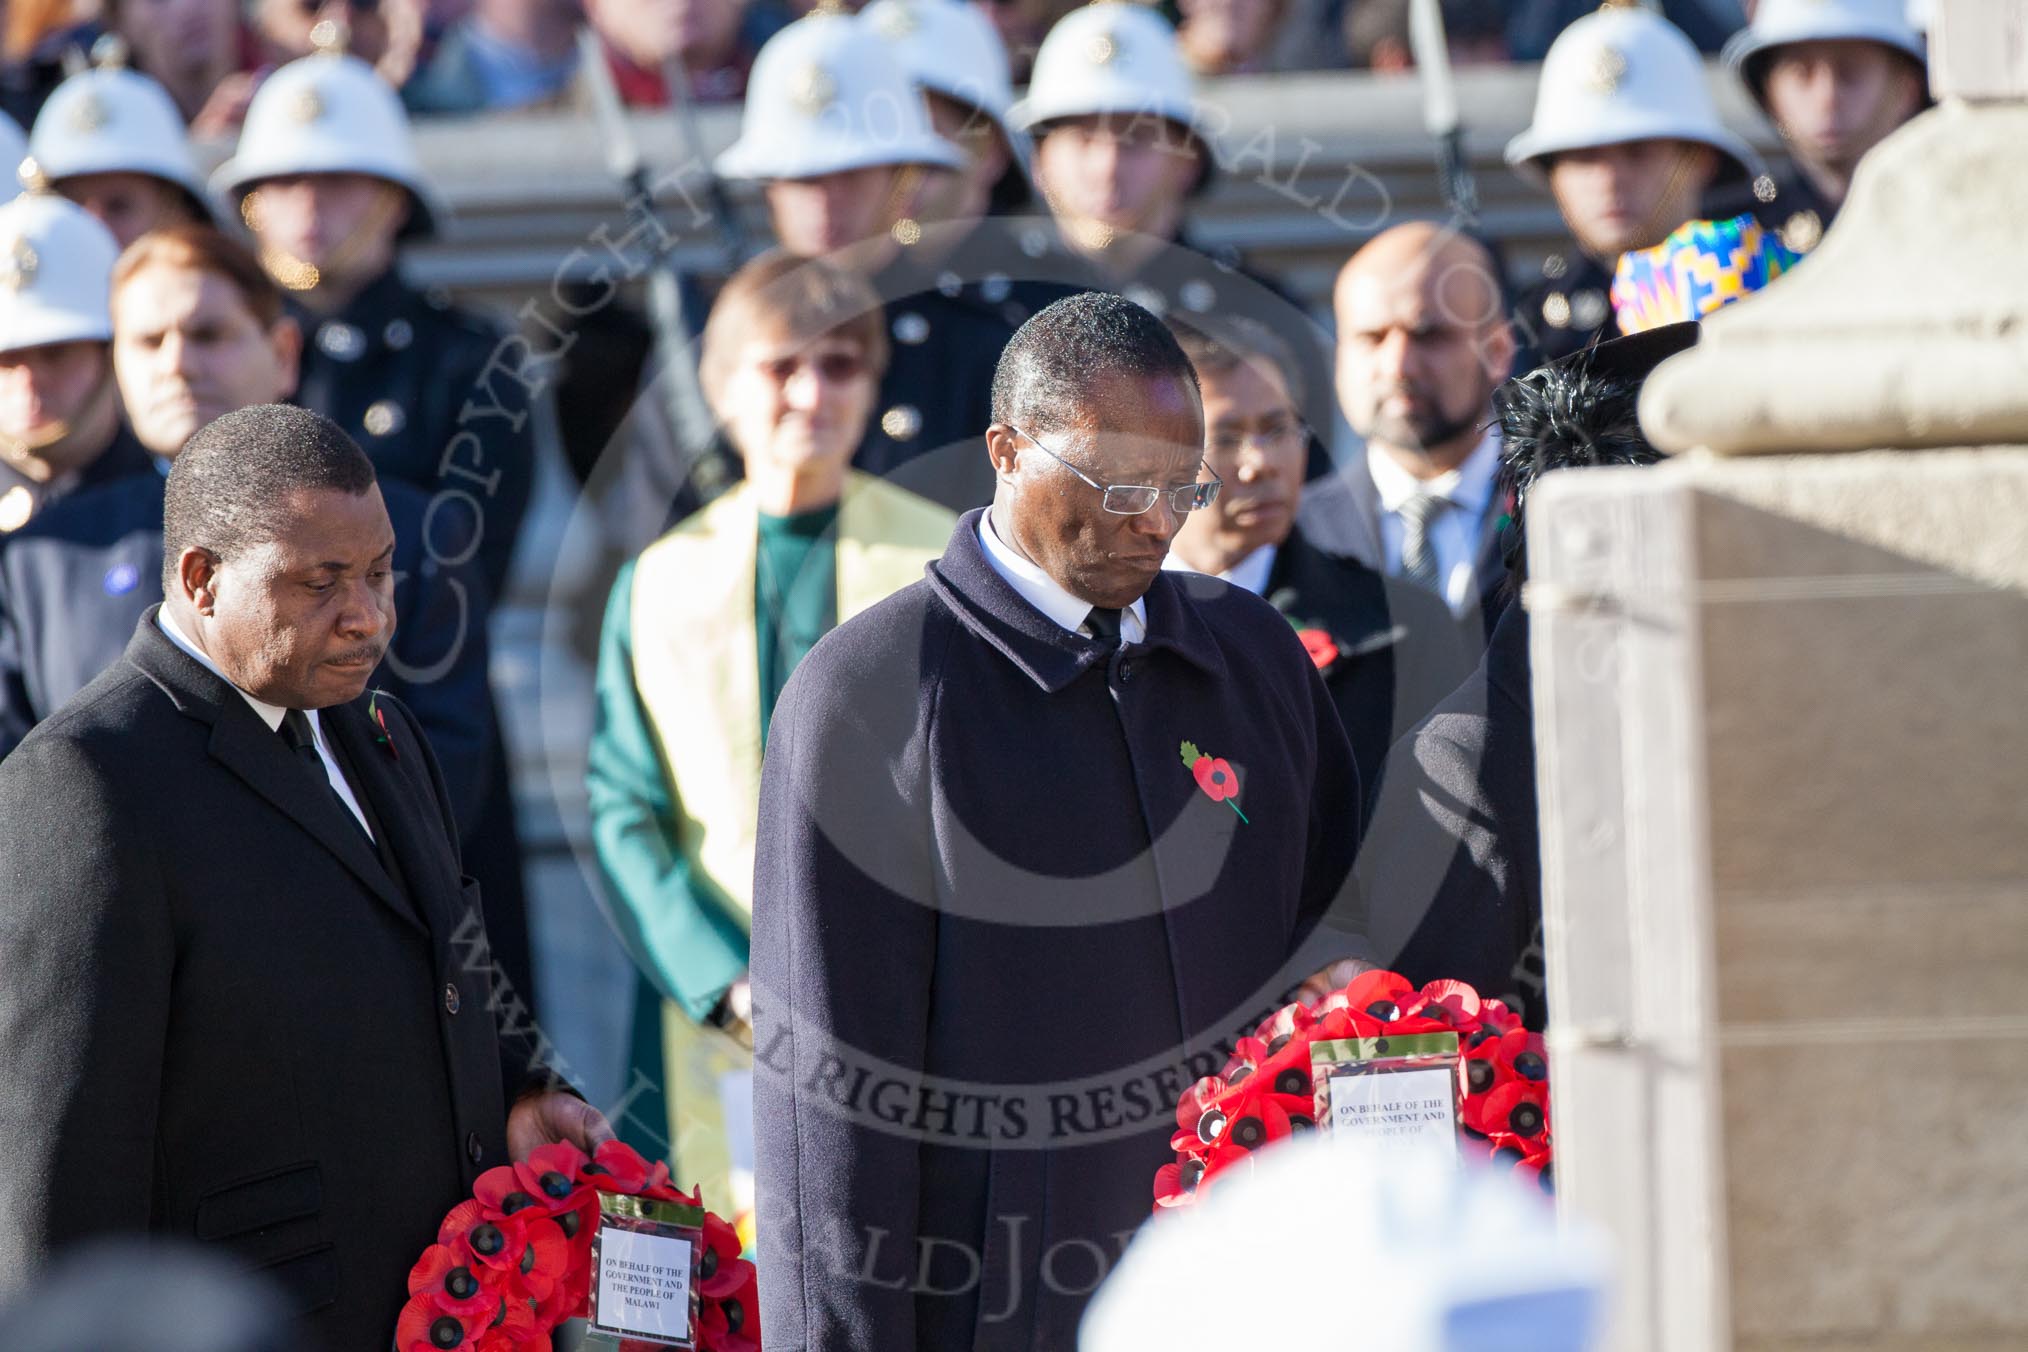 The High Commissioners lay there wreaths at the Cenotaph, partly out of view of the camera. In view the High Commissioners of Malawi and Kenya.